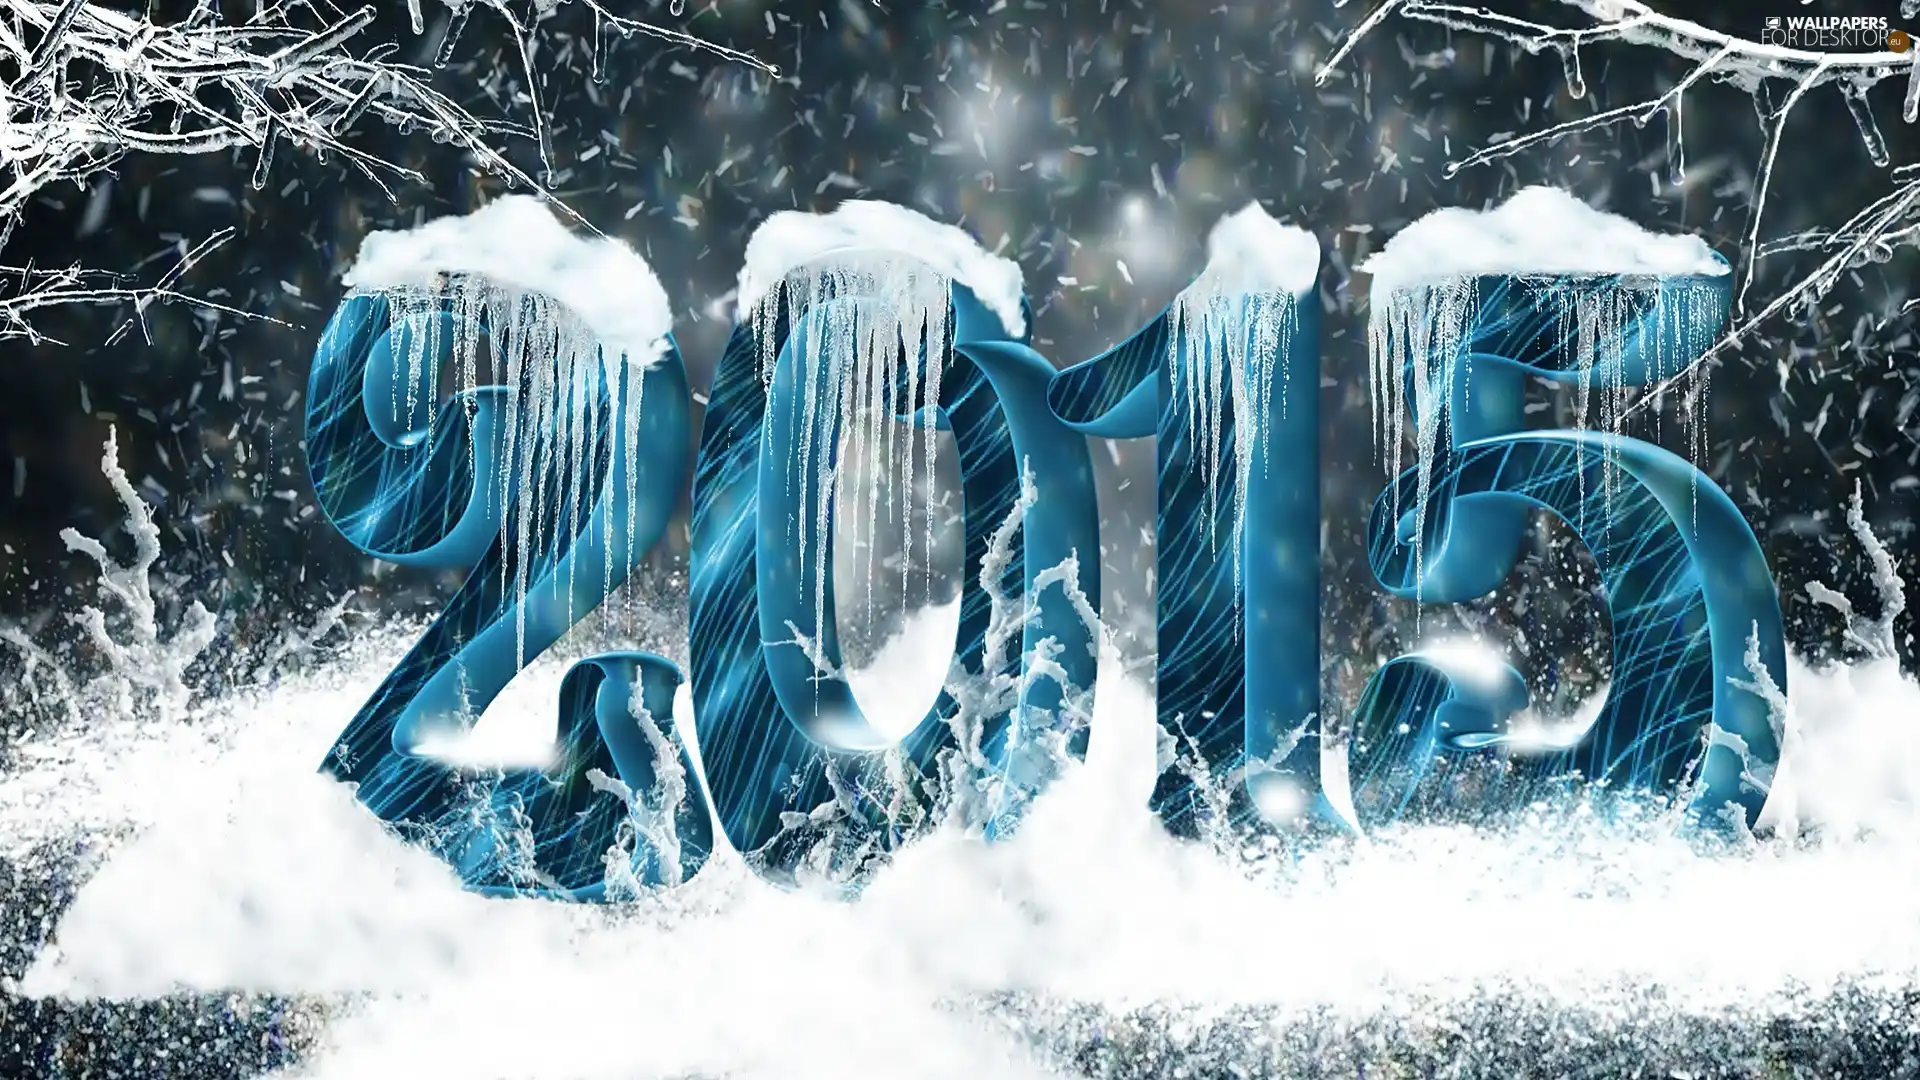 New Year, snow, icicle, 2015